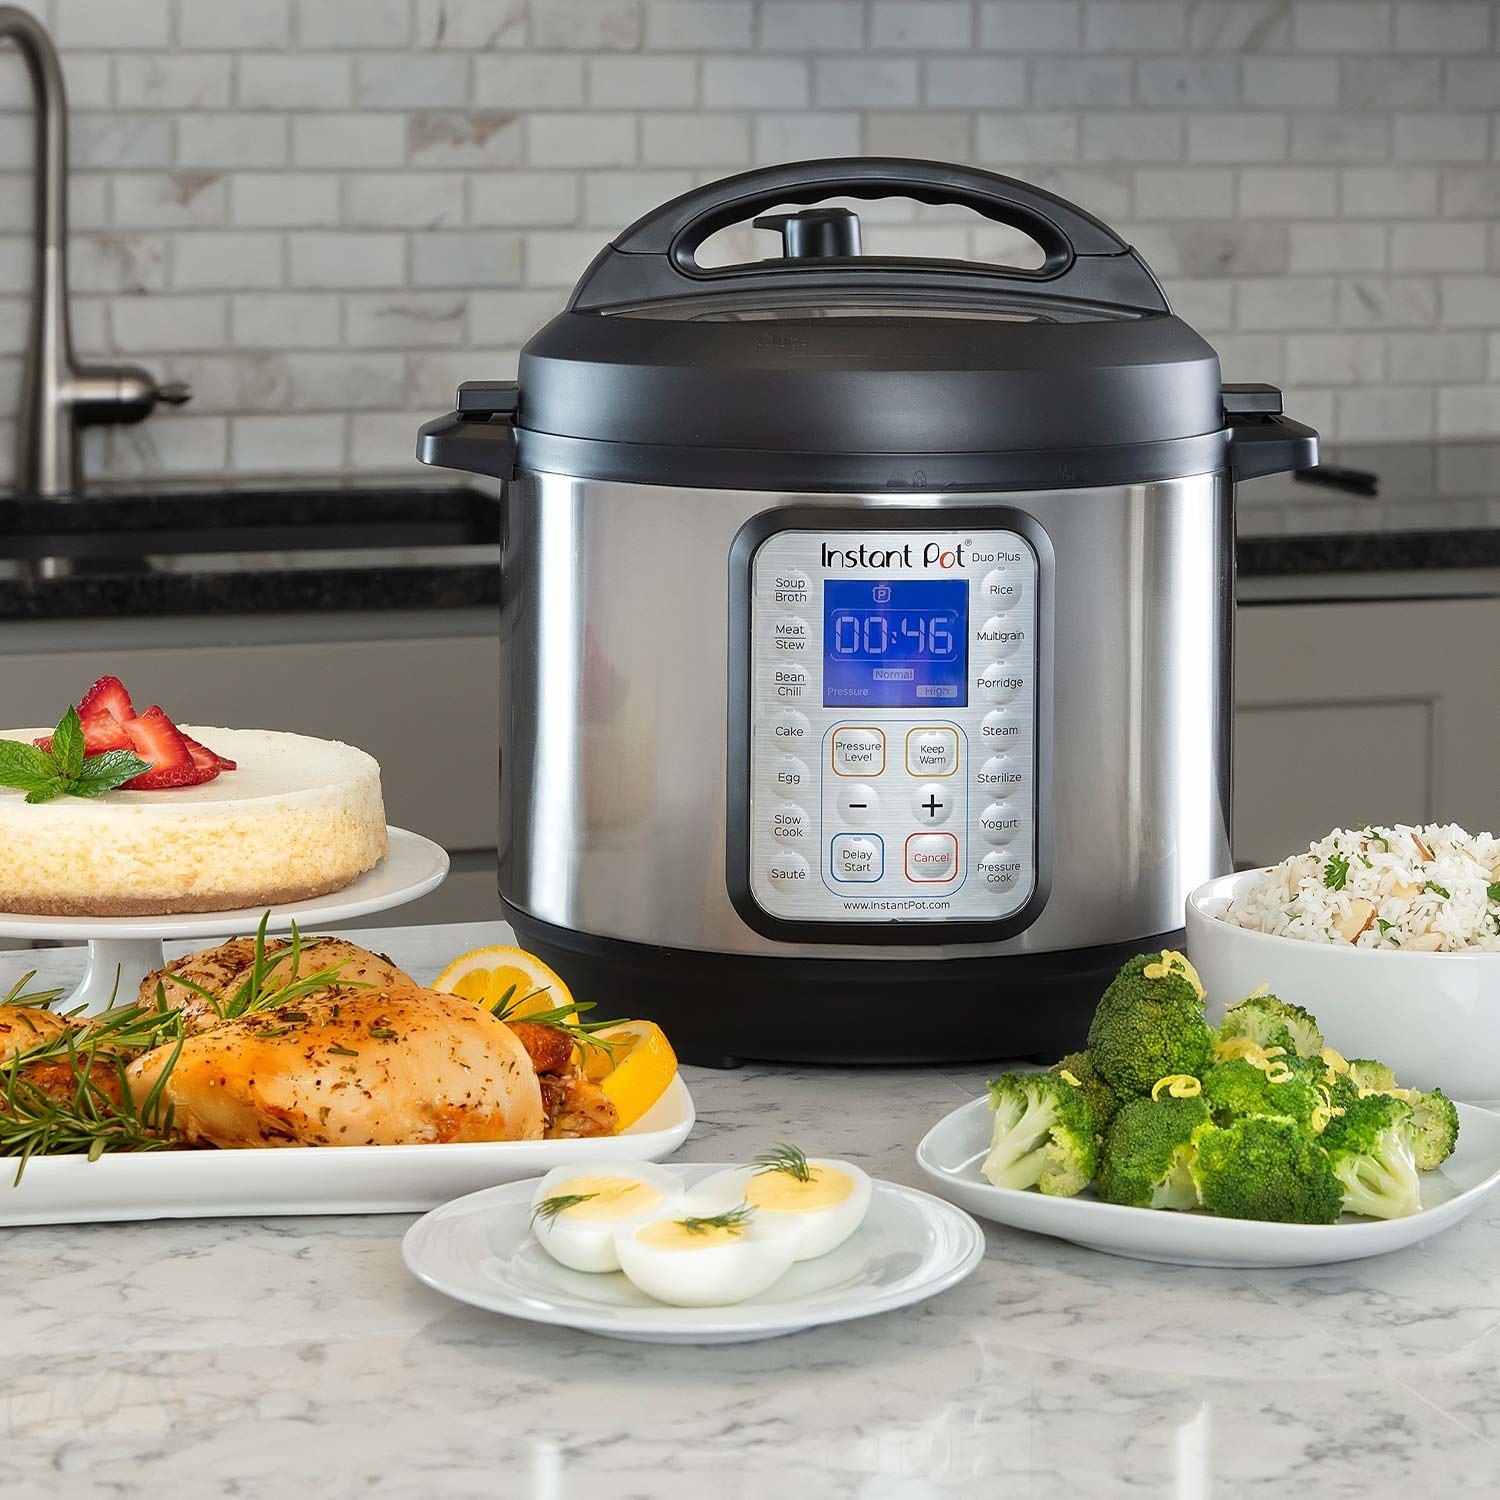 The Instant Pot on a counter surrounded by food